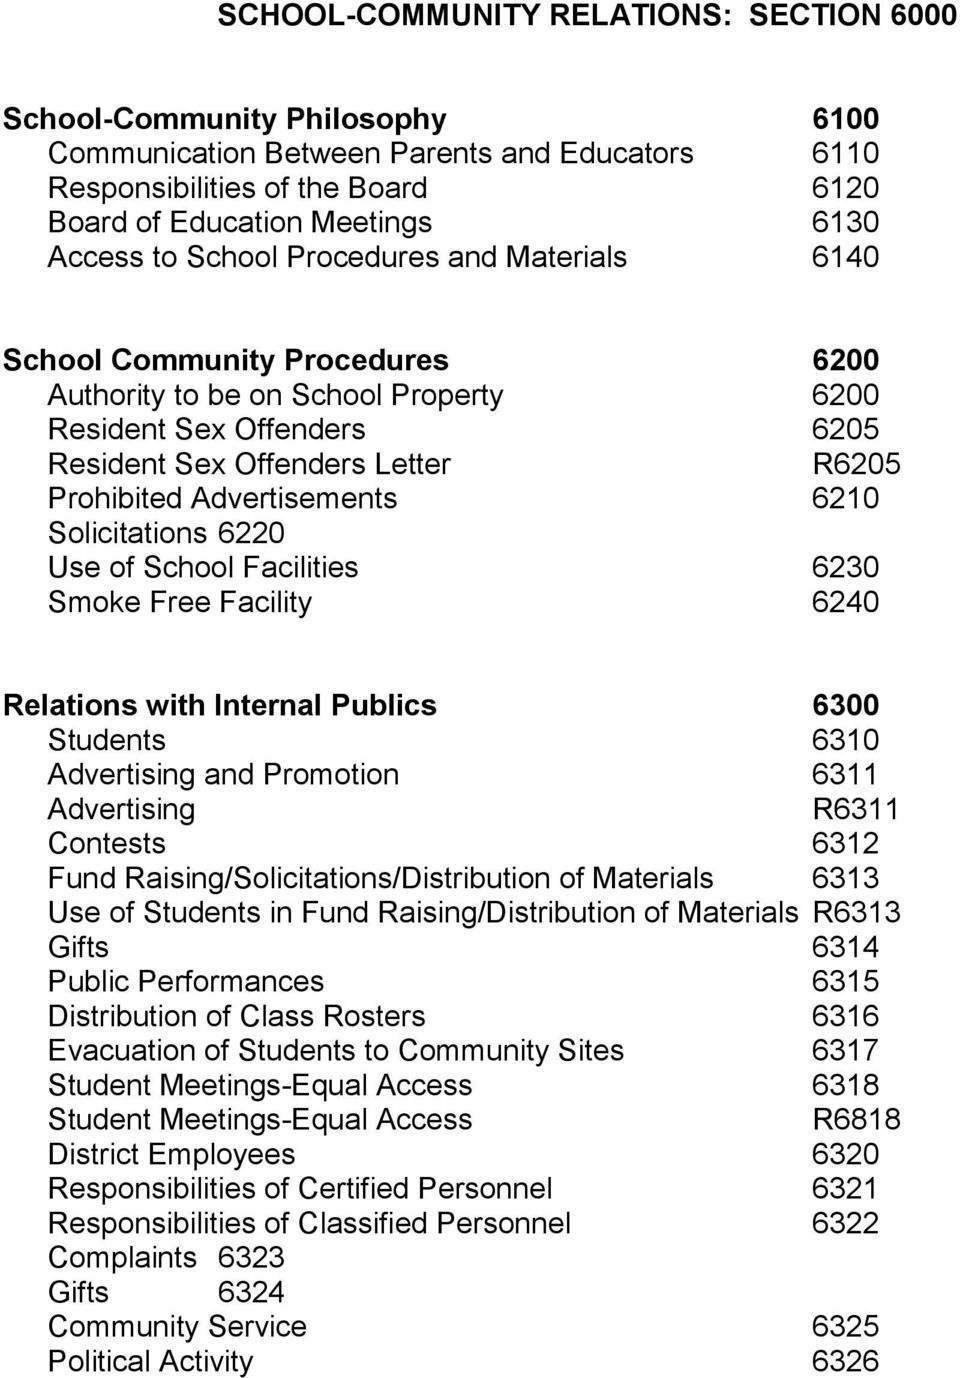 Advertisements 6210 Solicitations 6220 Use of School Facilities 6230 Smoke Free Facility 6240 Relations with Internal Publics 6300 Students 6310 Advertising and Promotion 6311 Advertising R6311